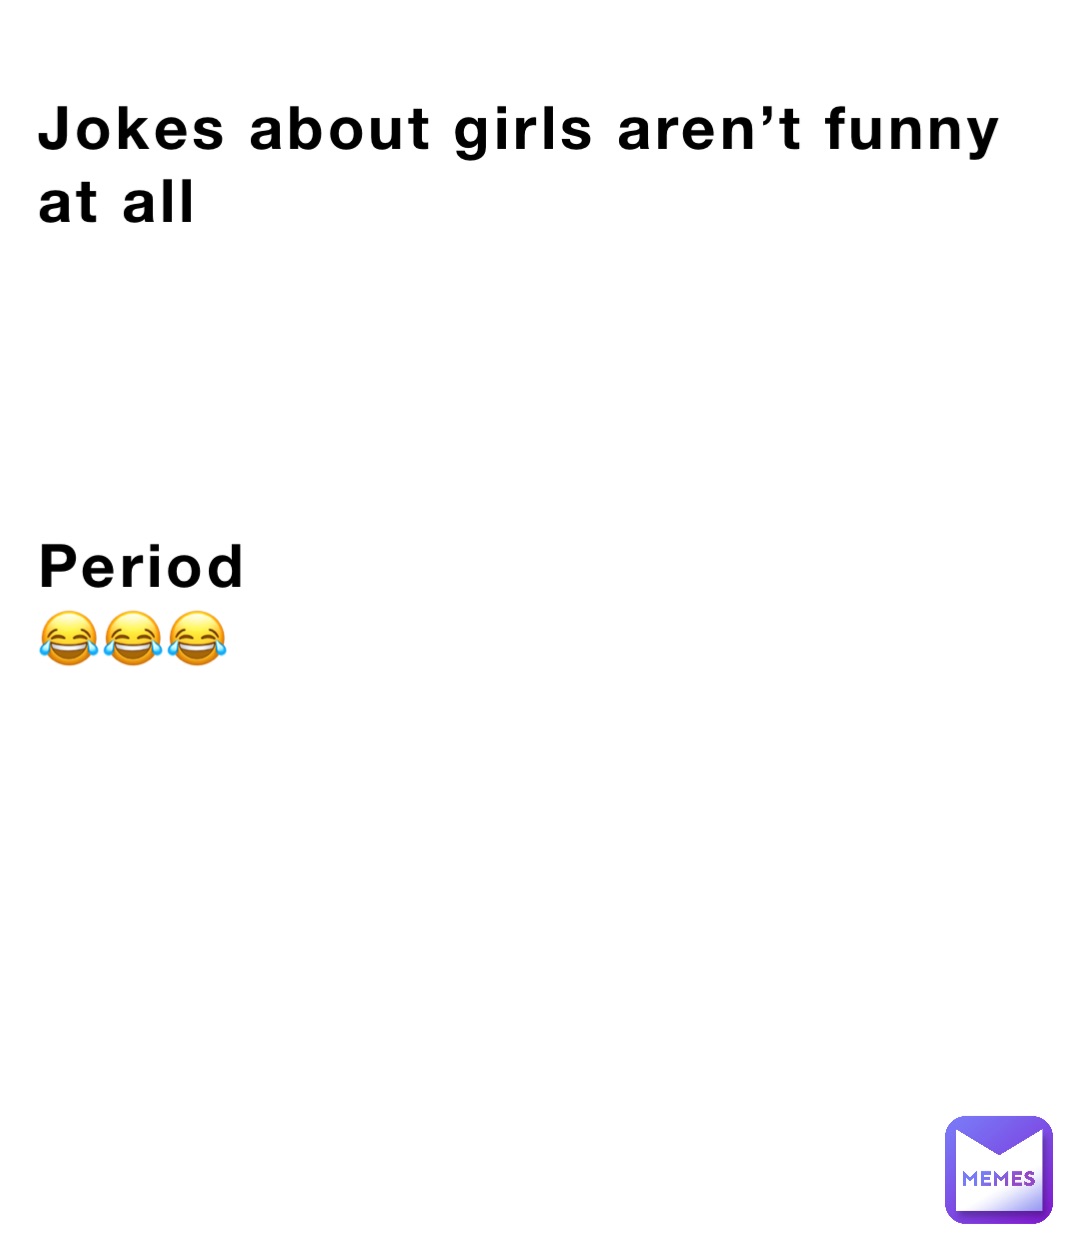 Jokes about girls aren't funny at all Period 😂😂😂 | @dhdiddjdndjd | Memes